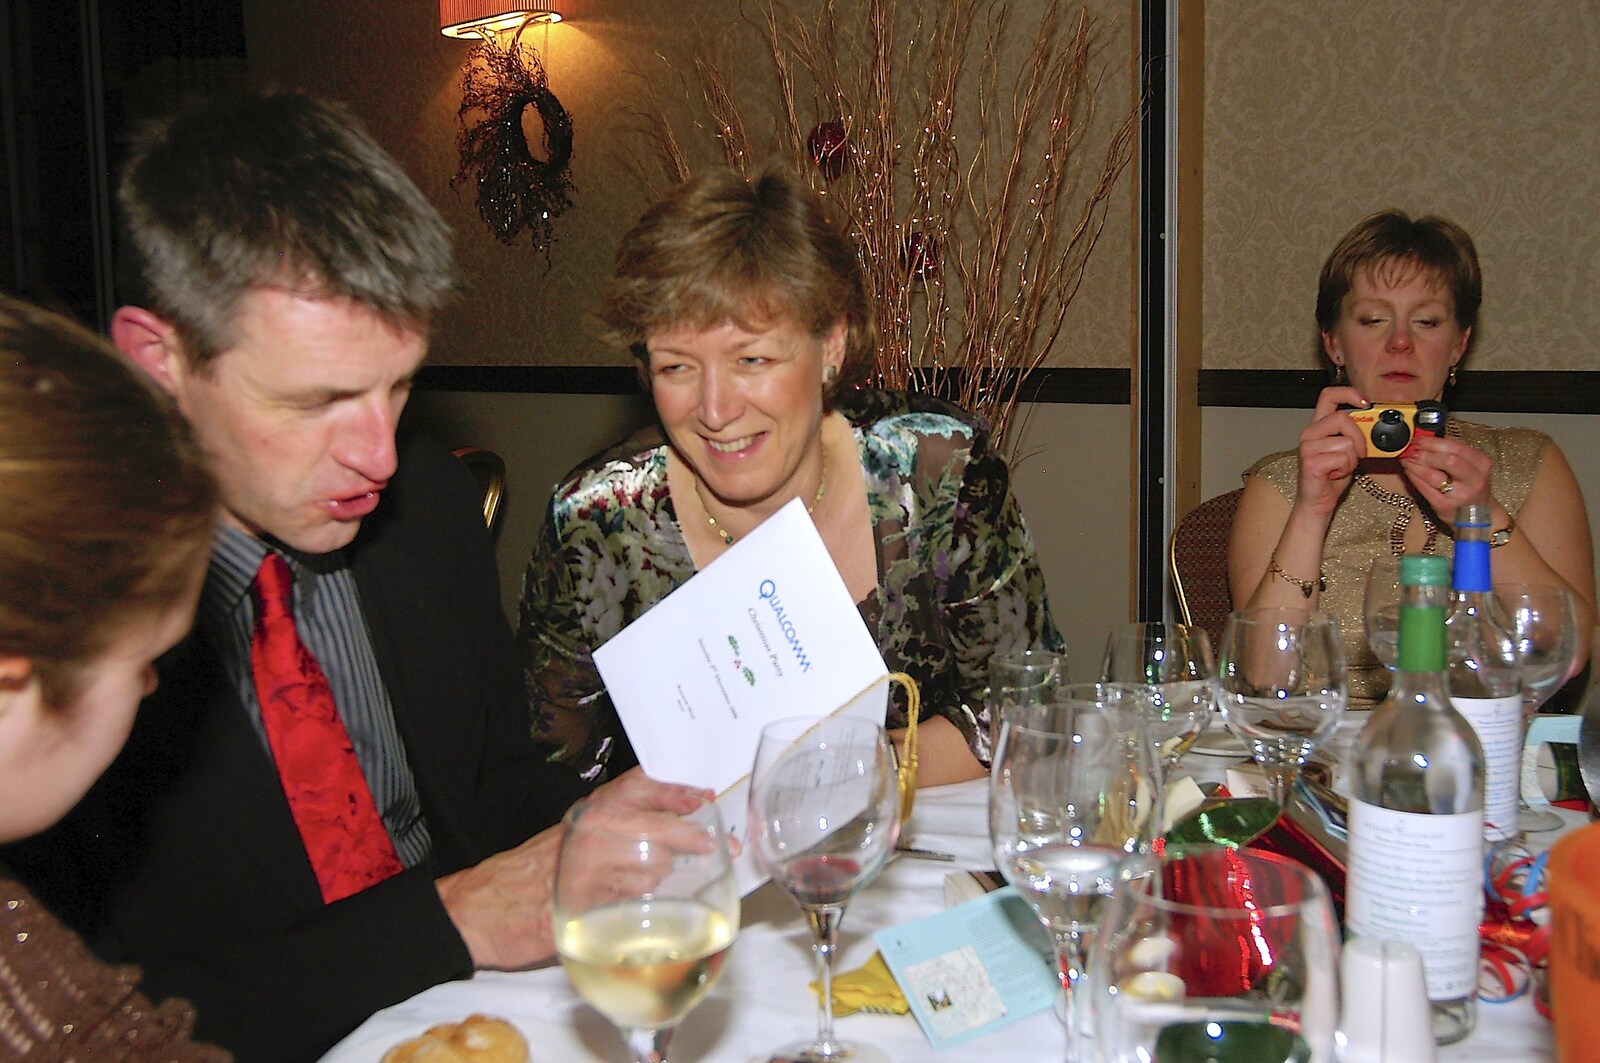 John Scott reads the menu from Qualcomm Christmas, The BBs and Isobel Moves Flats, Cambridge and Ascot, Berkshire - 2nd December 2006